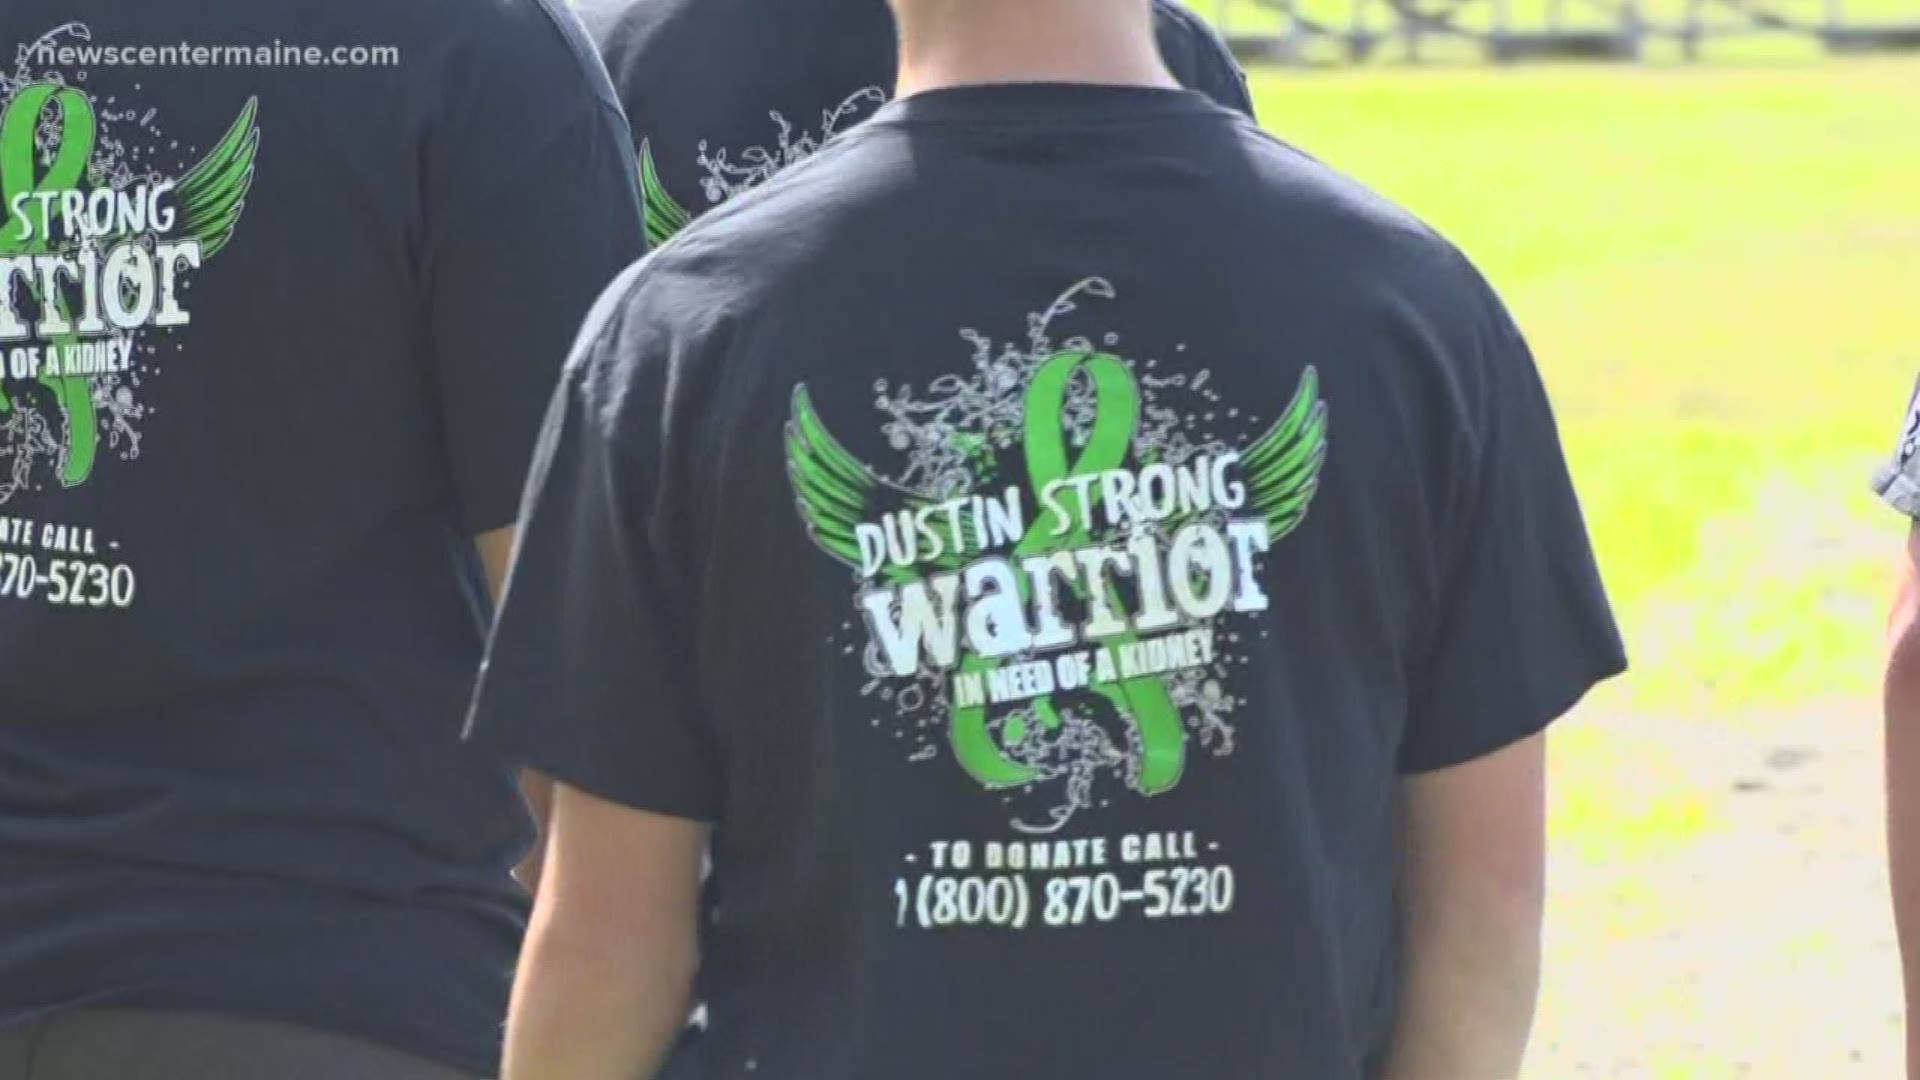 More than 100 people came out to support the kickball fundraiser for Bucksport local Dustin Robbins